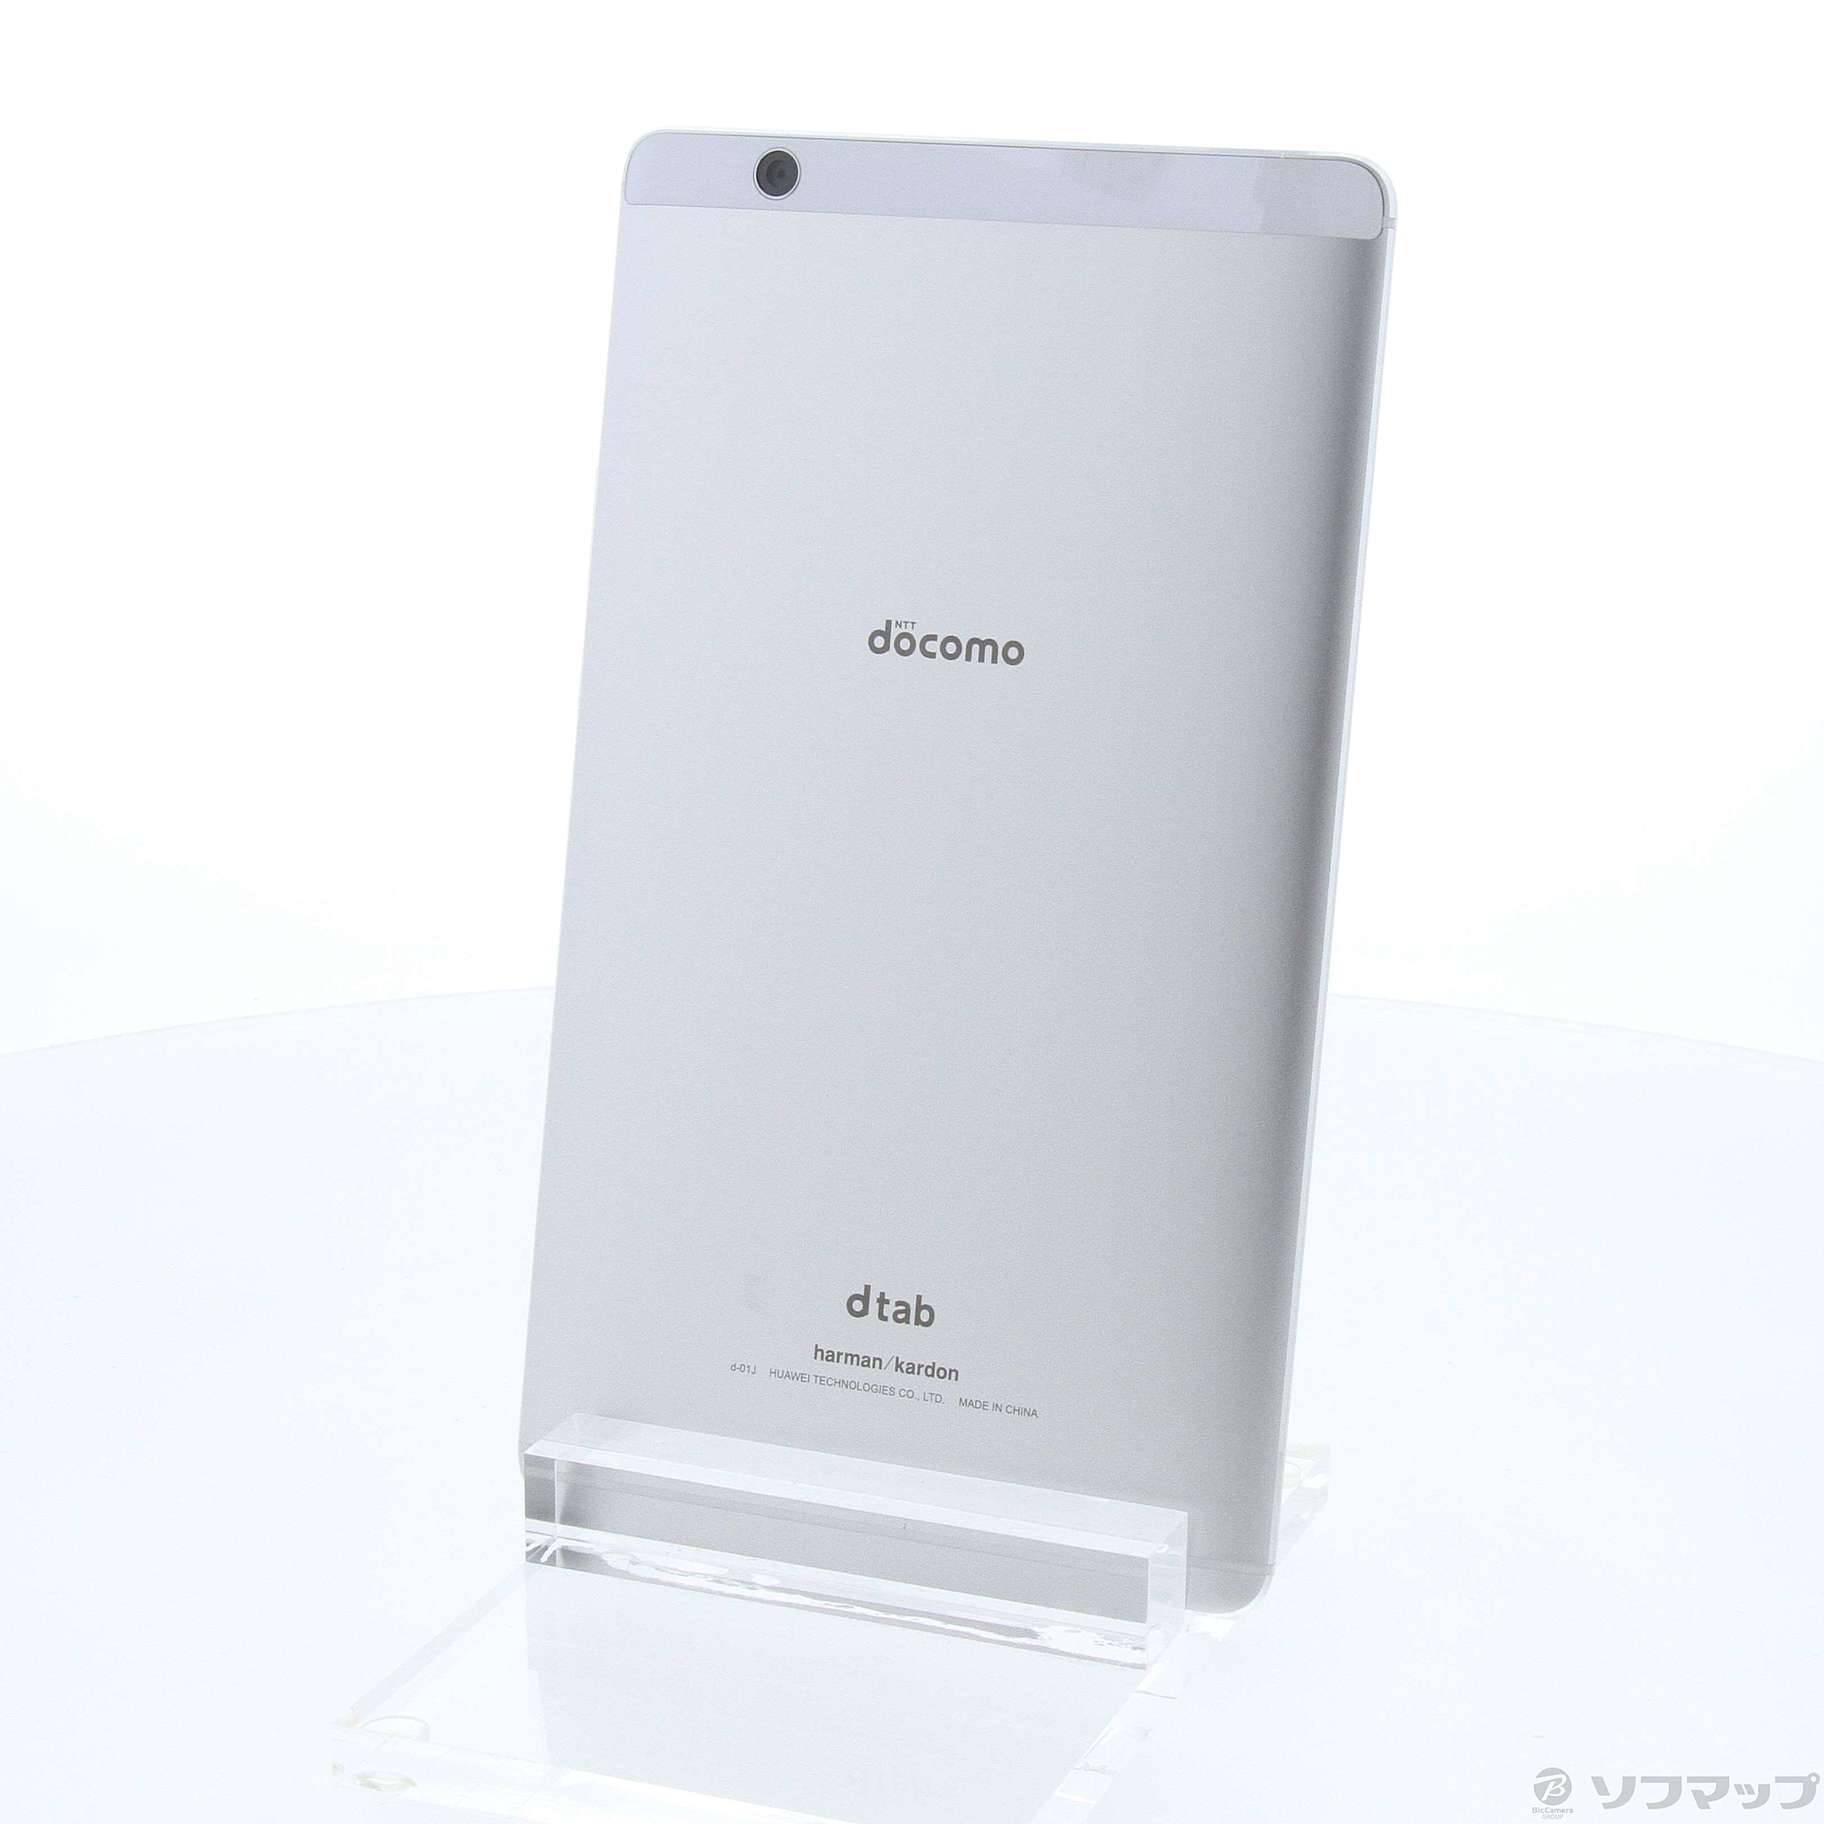 Huawei dtab Compact d-01J Silver  タブレット